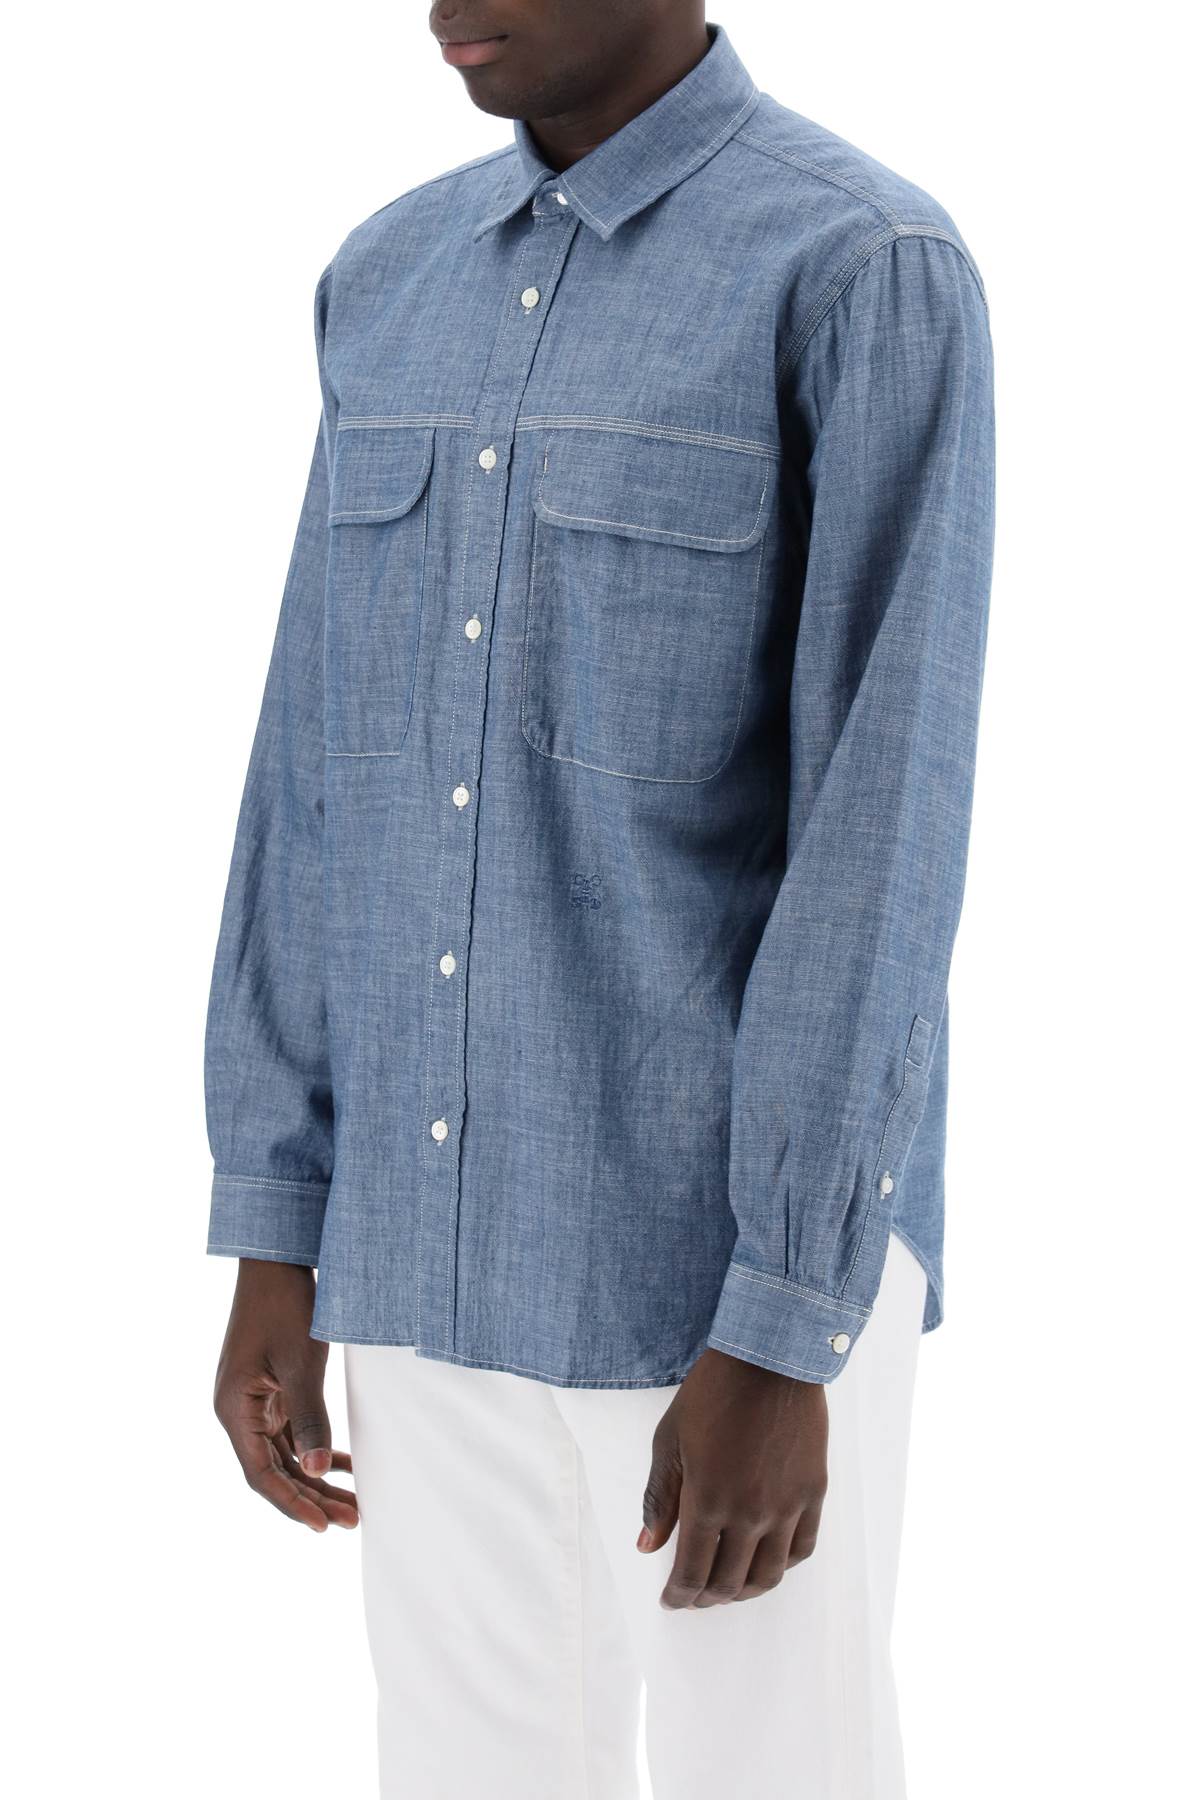 Closed Closed cotton chambray shirt for